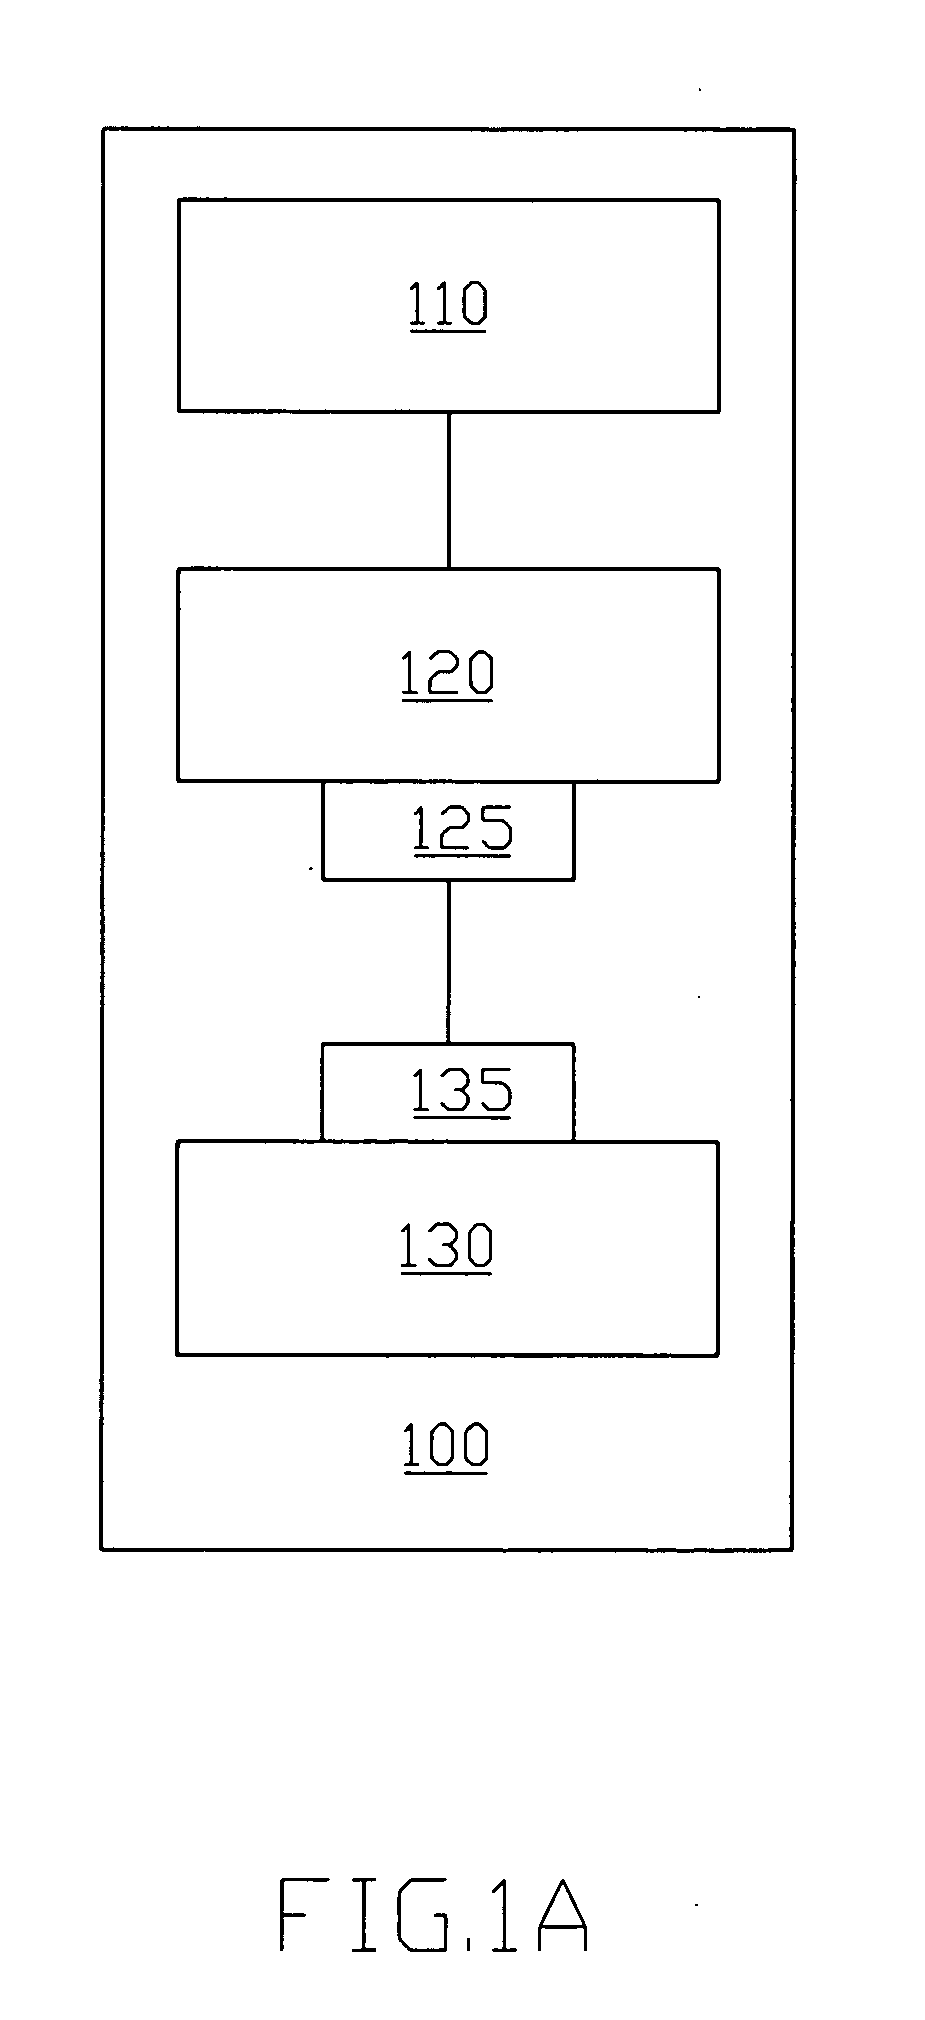 Earpiece set for the wireless communication apparatus